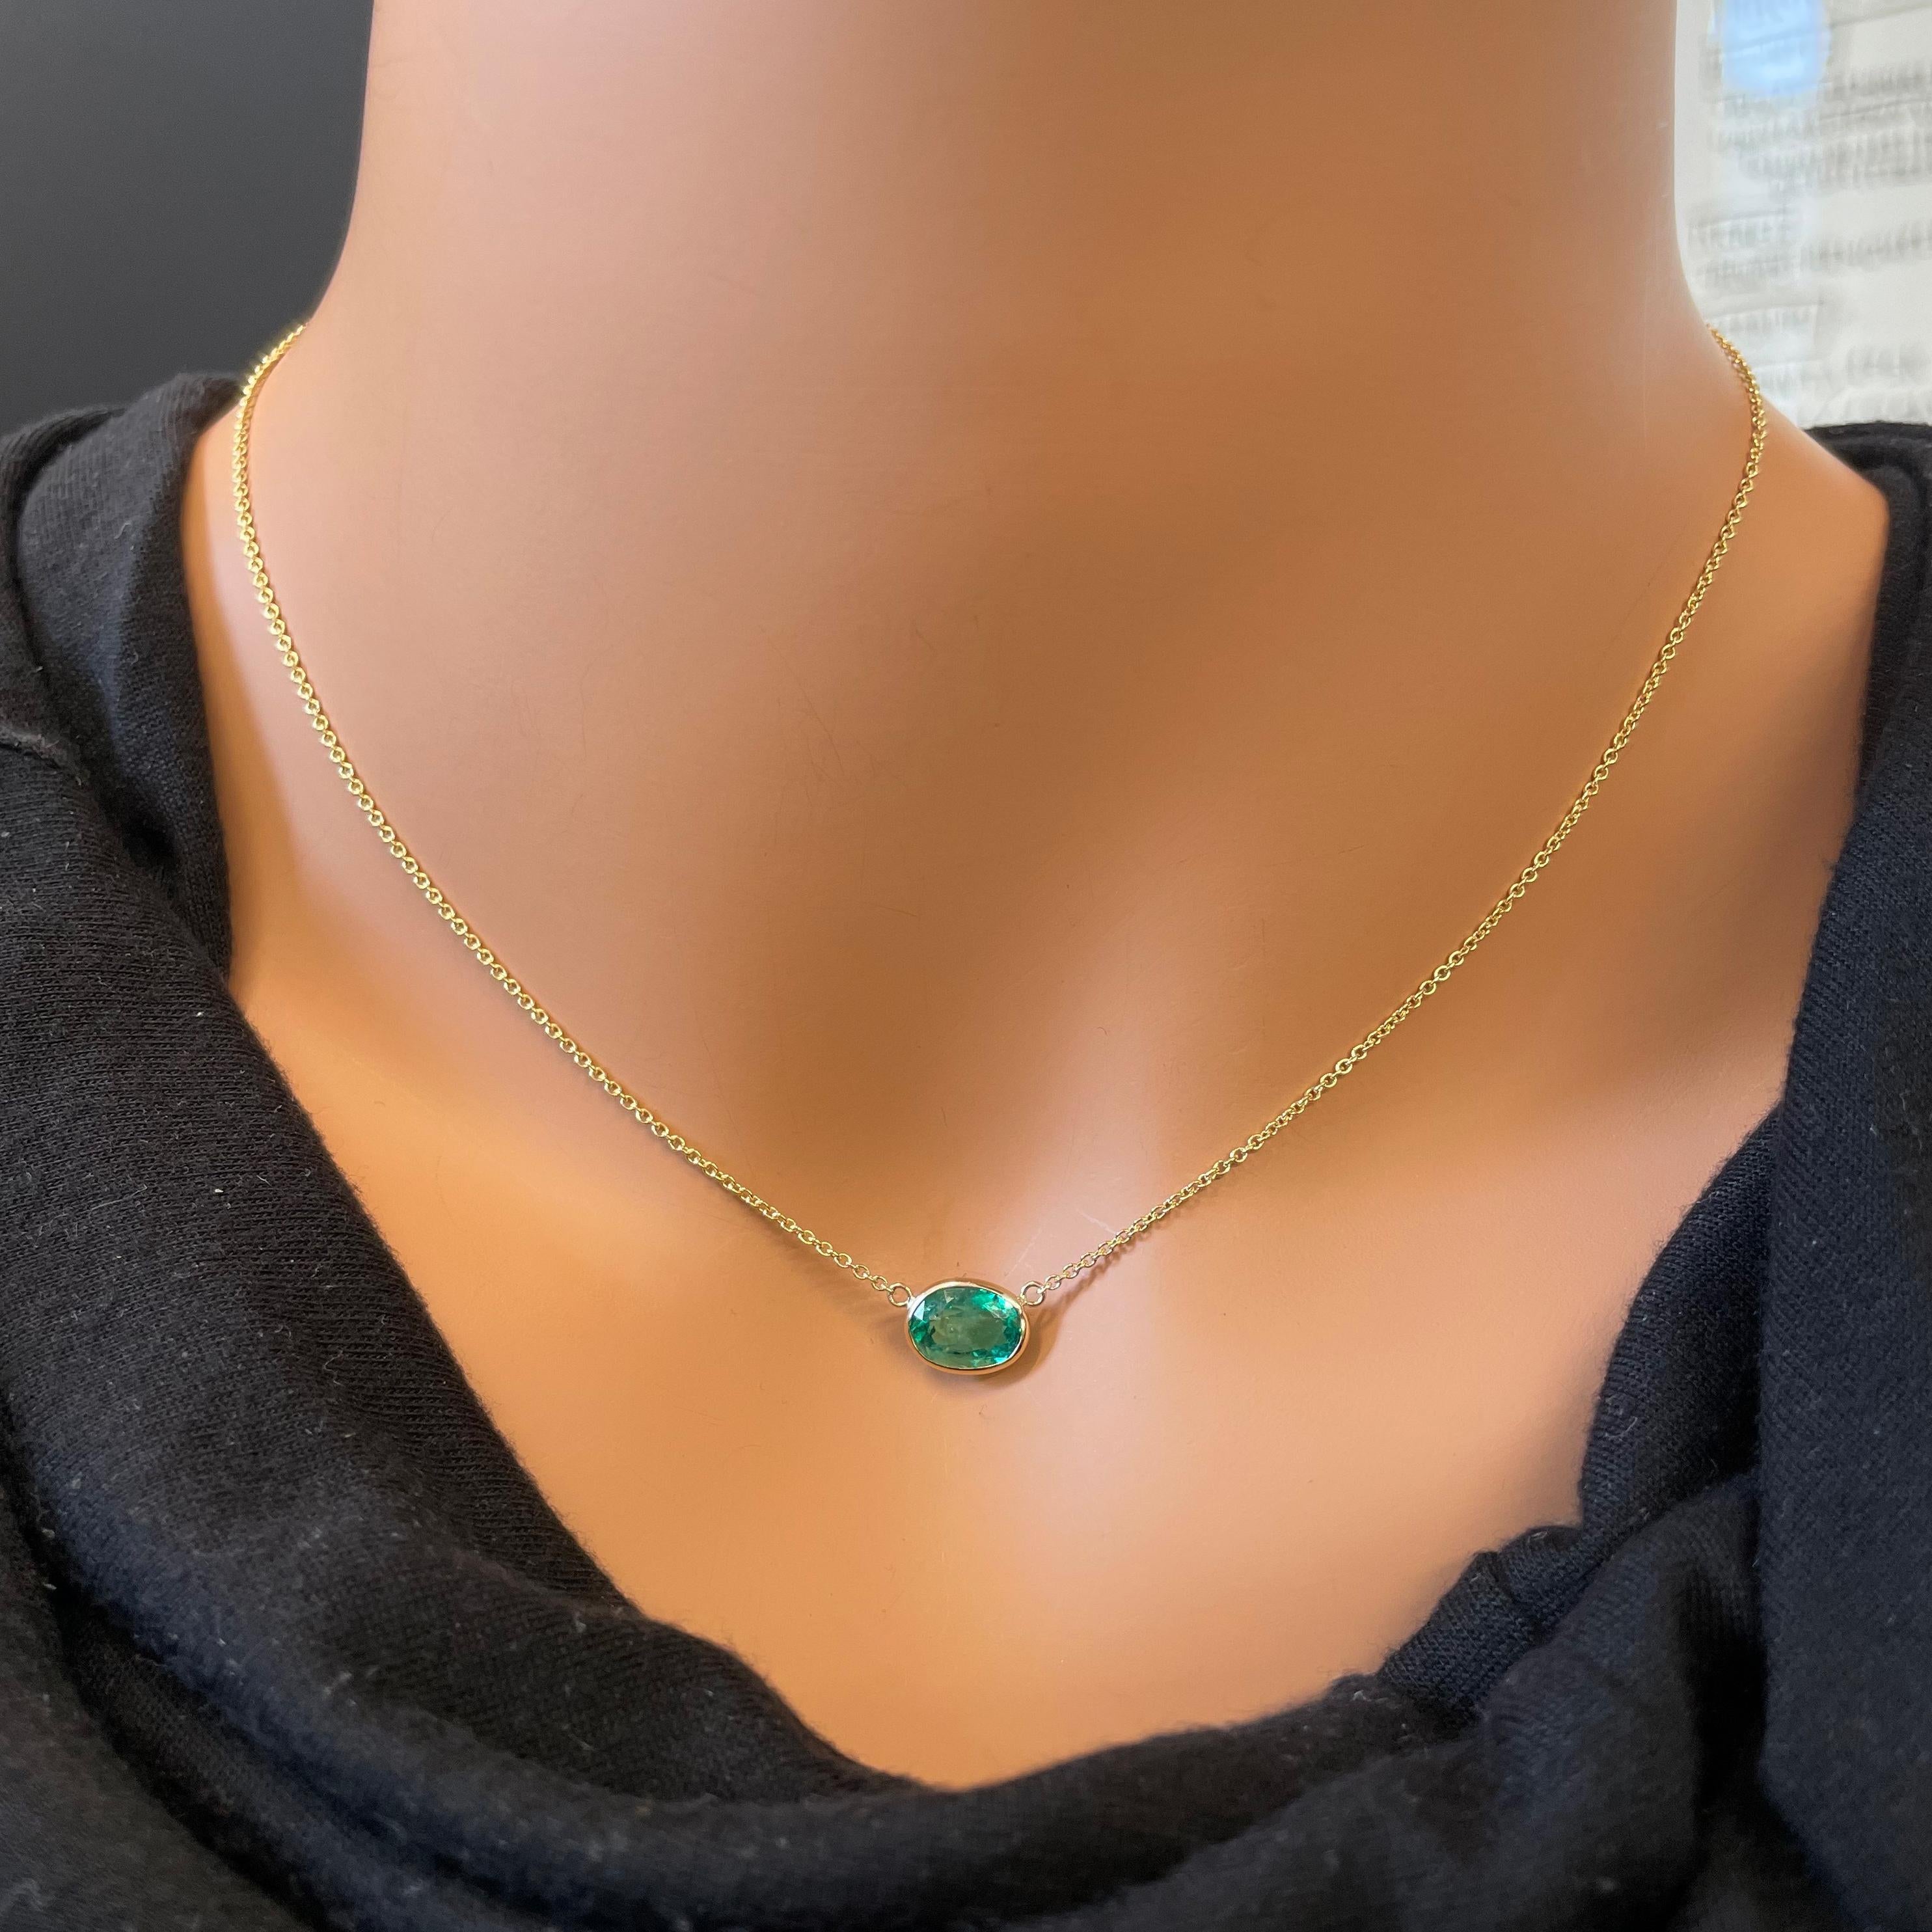 Contemporary 1.73 Carat Green Emerald Oval Cut Fashion Necklaces In 14K Yellow Gold For Sale